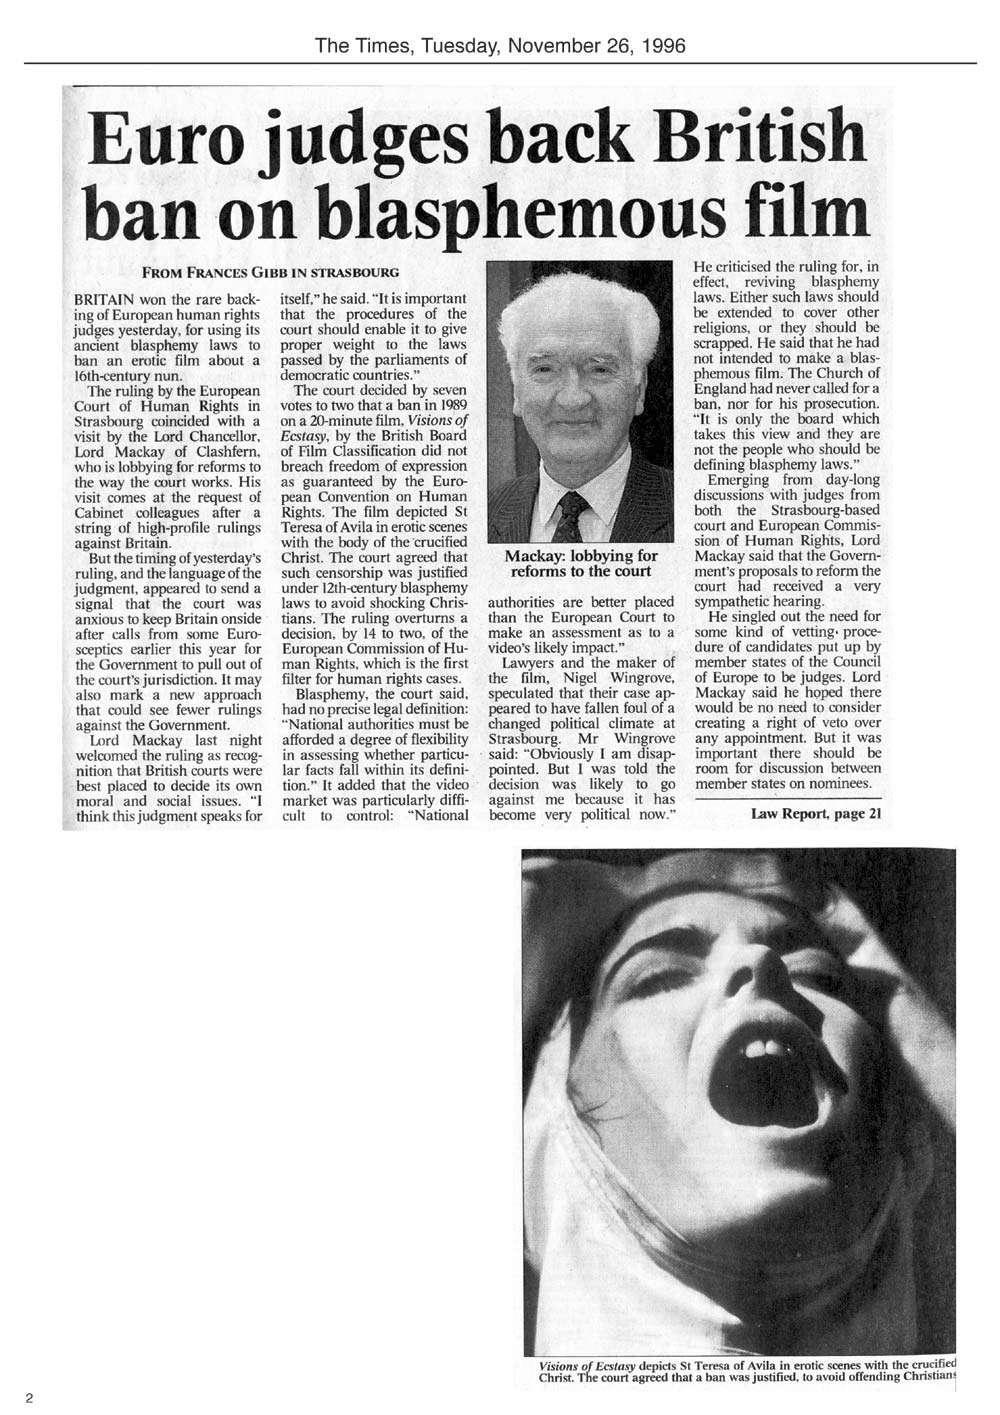 The Times, Tuesday, November 26, 1996